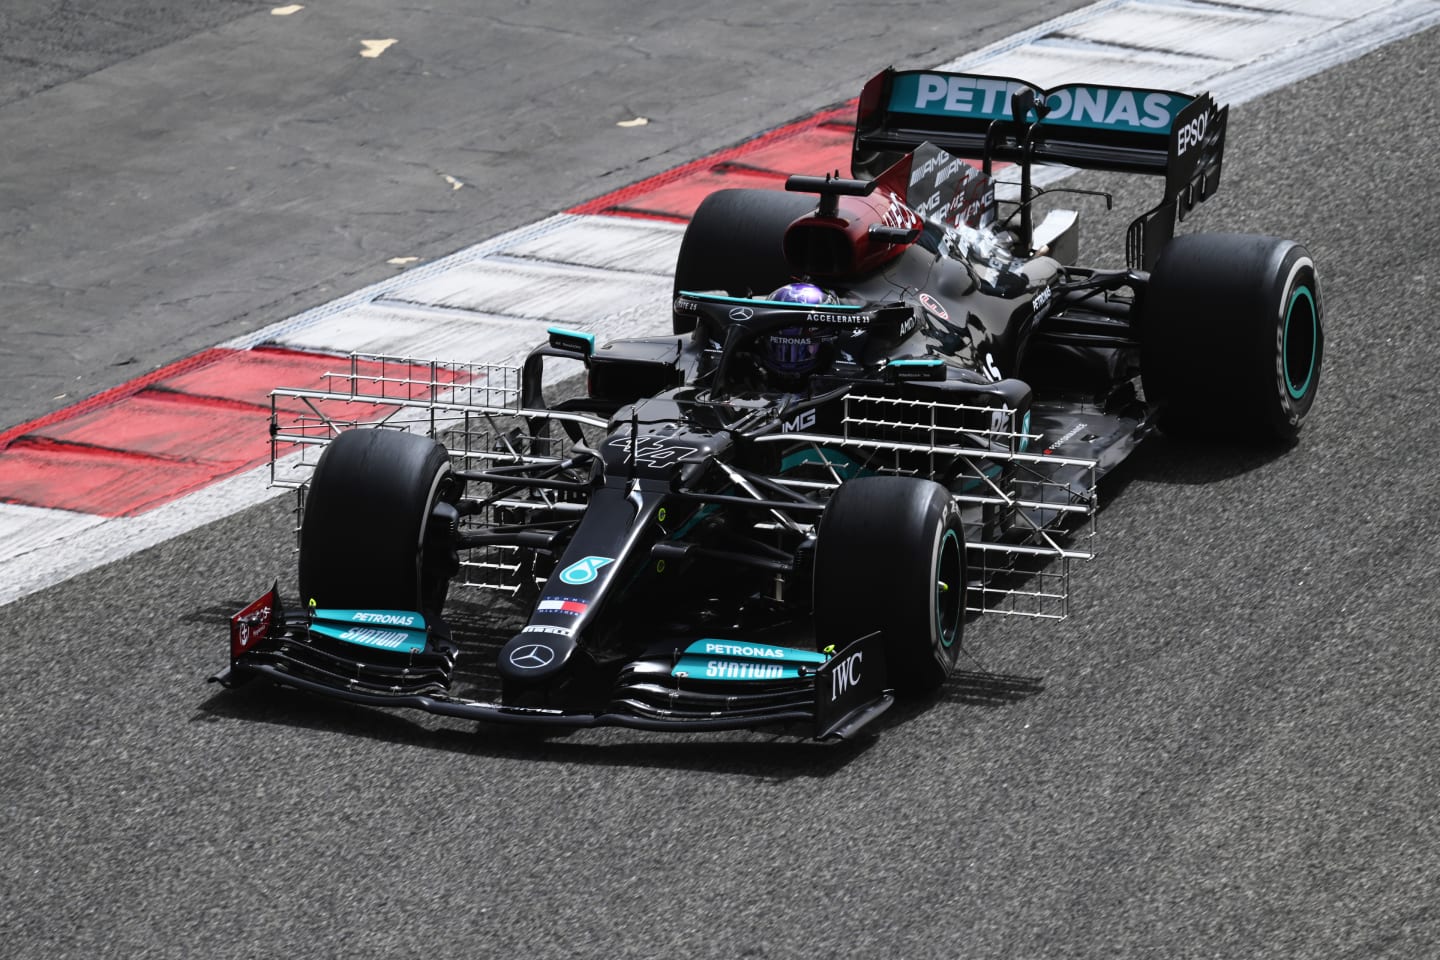 Lewis Hamilton was back in the car on Saturday after a tricky Friday for Mercedes